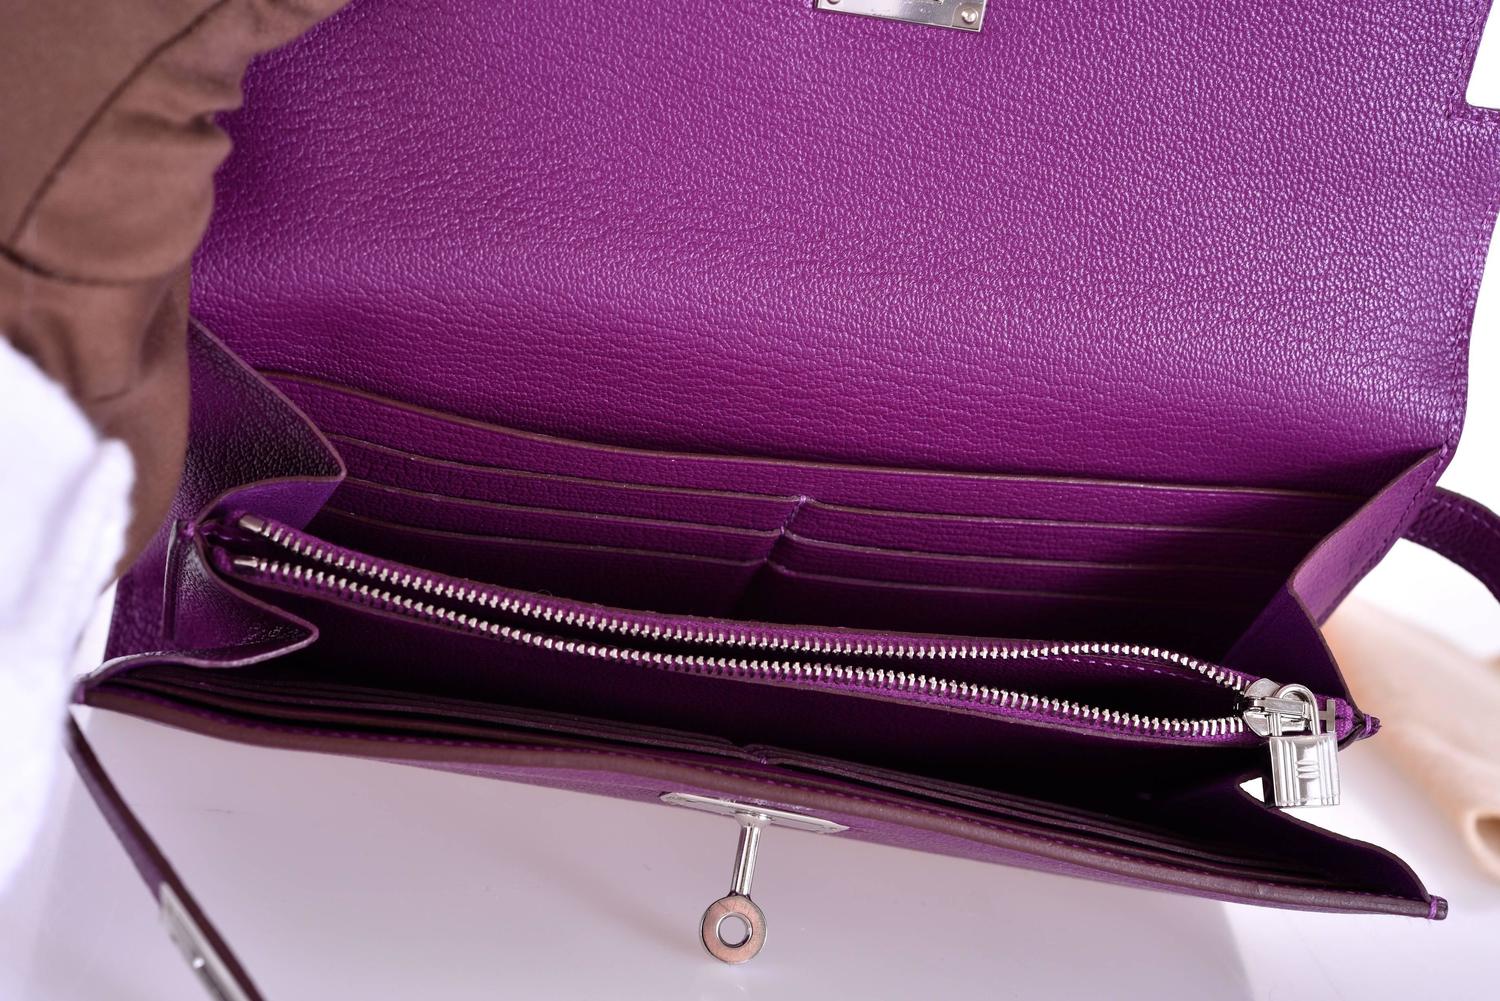 hermes bag for sale - NEW HERMES KELLY LONGUE WALLET ANEMONE / CLUTCH CHEVRE LEATHER ...